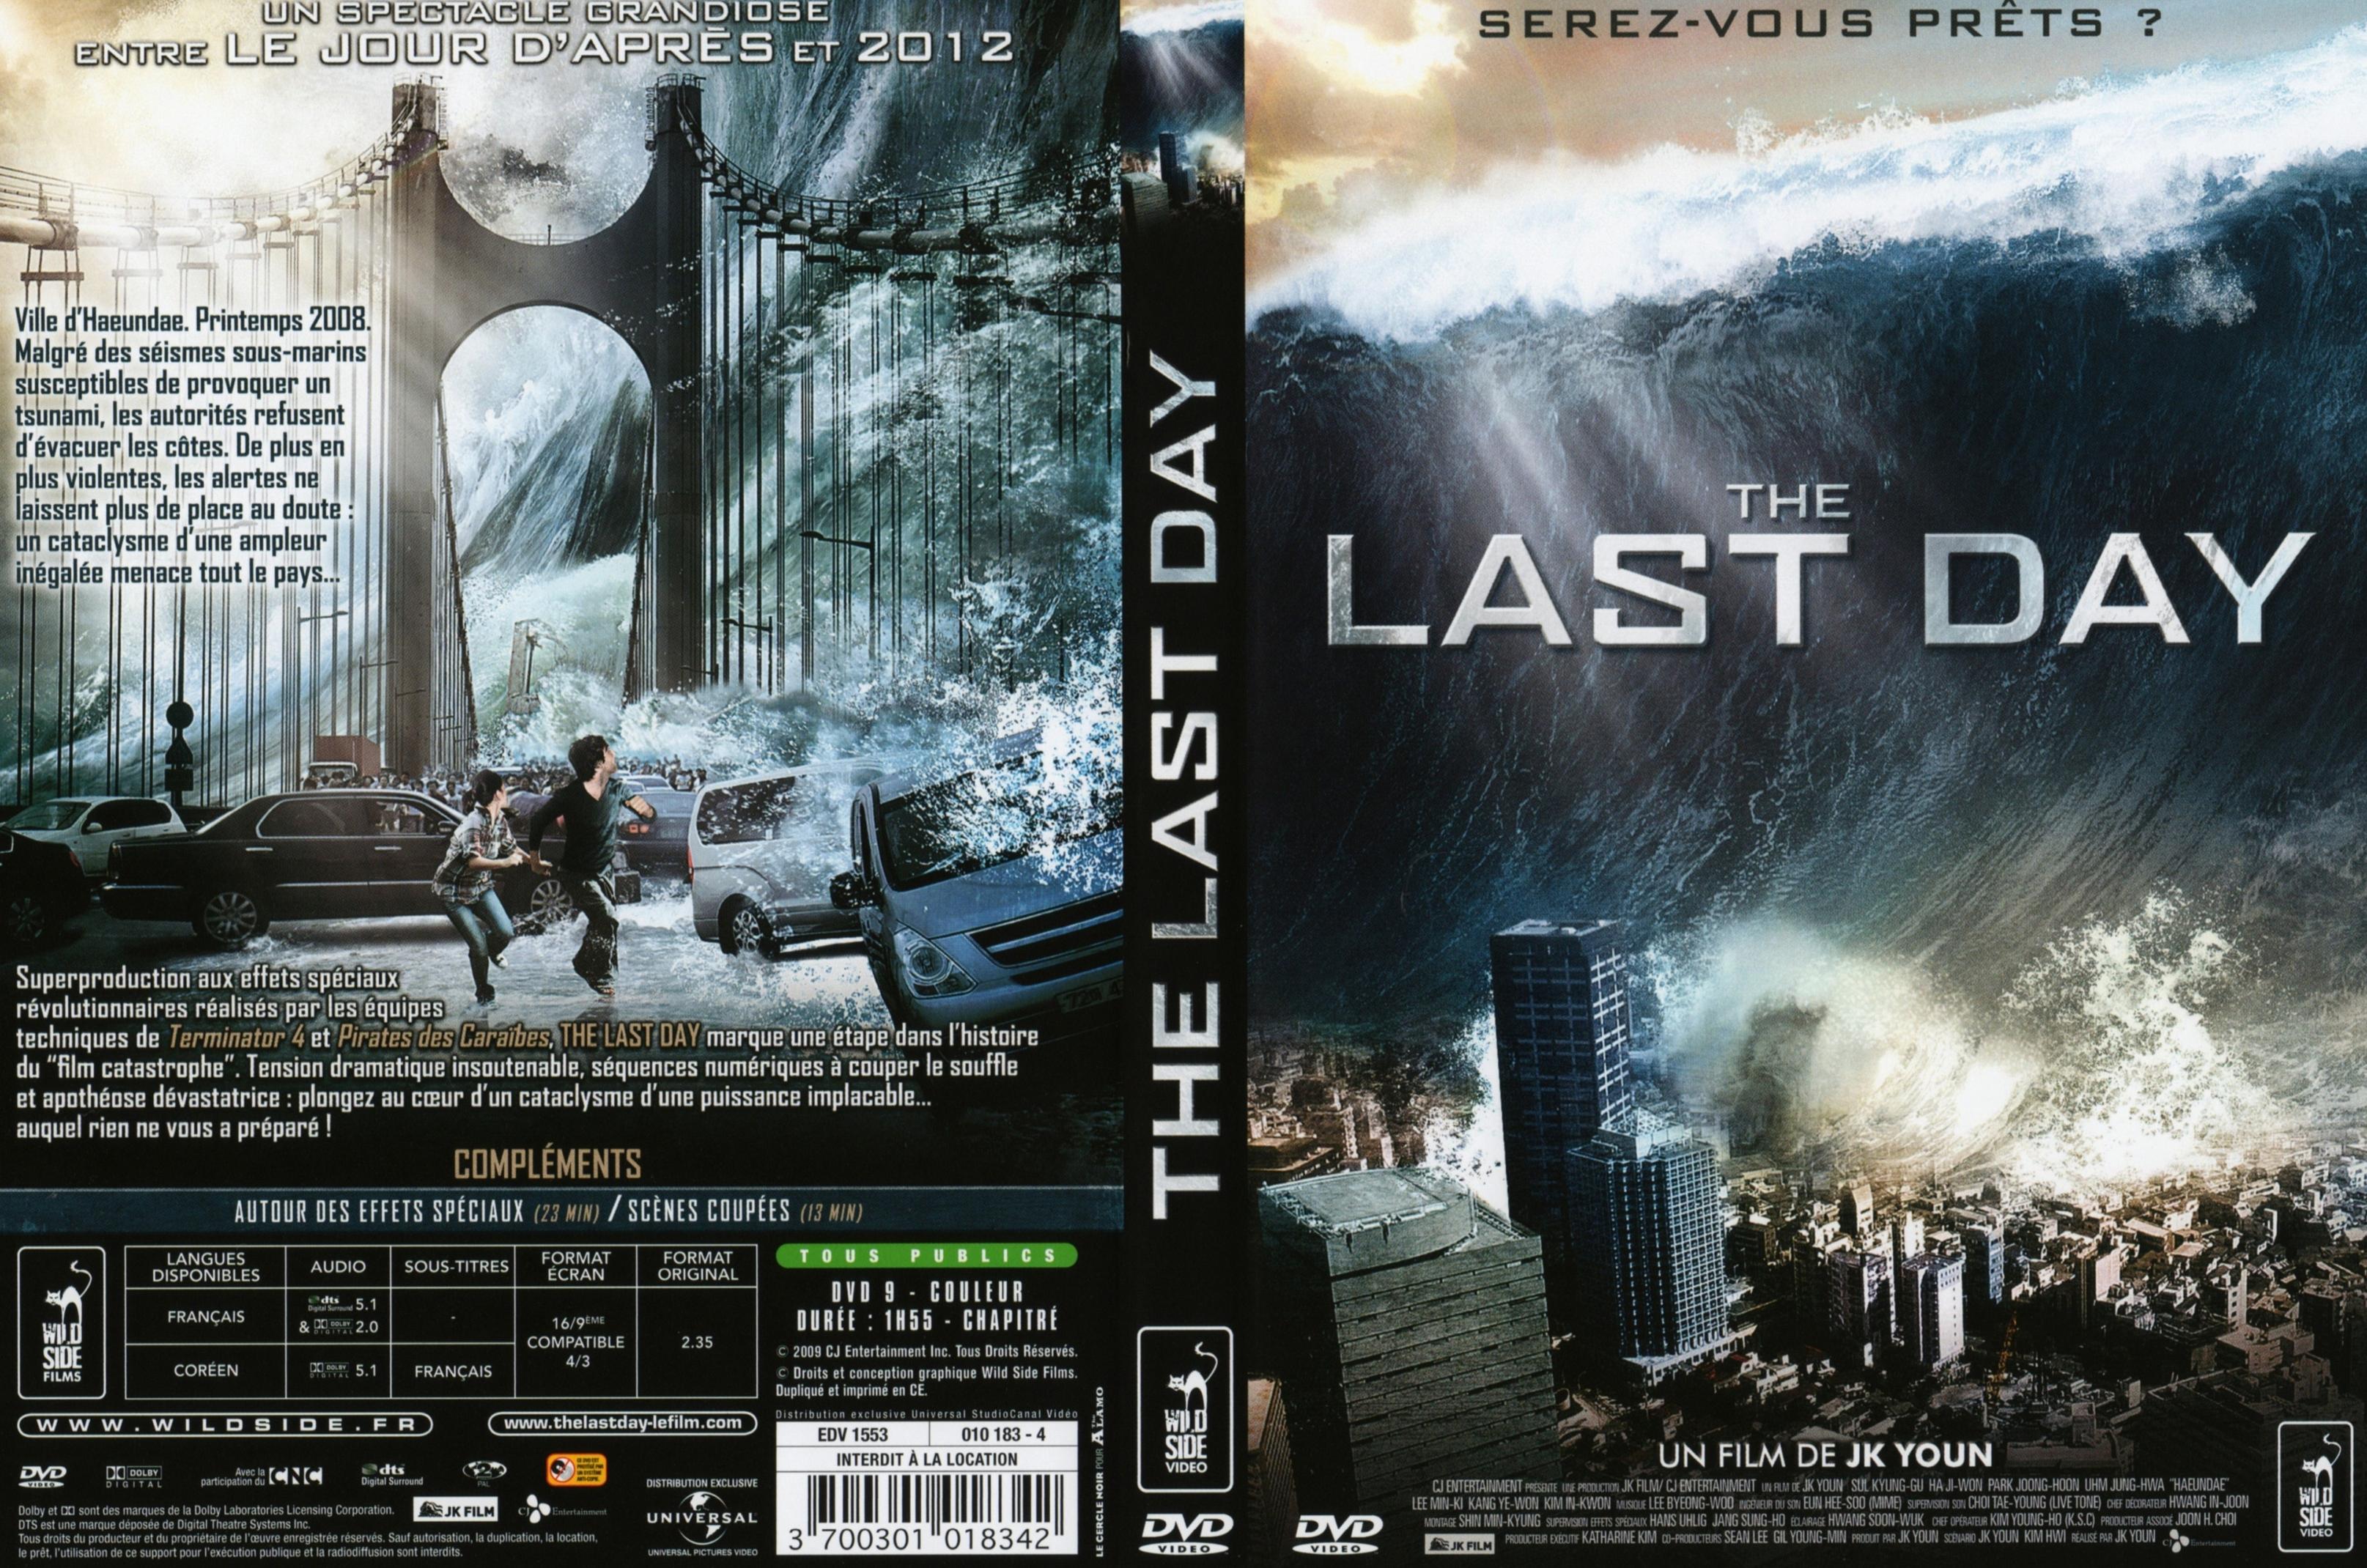 Jaquette DVD The last day